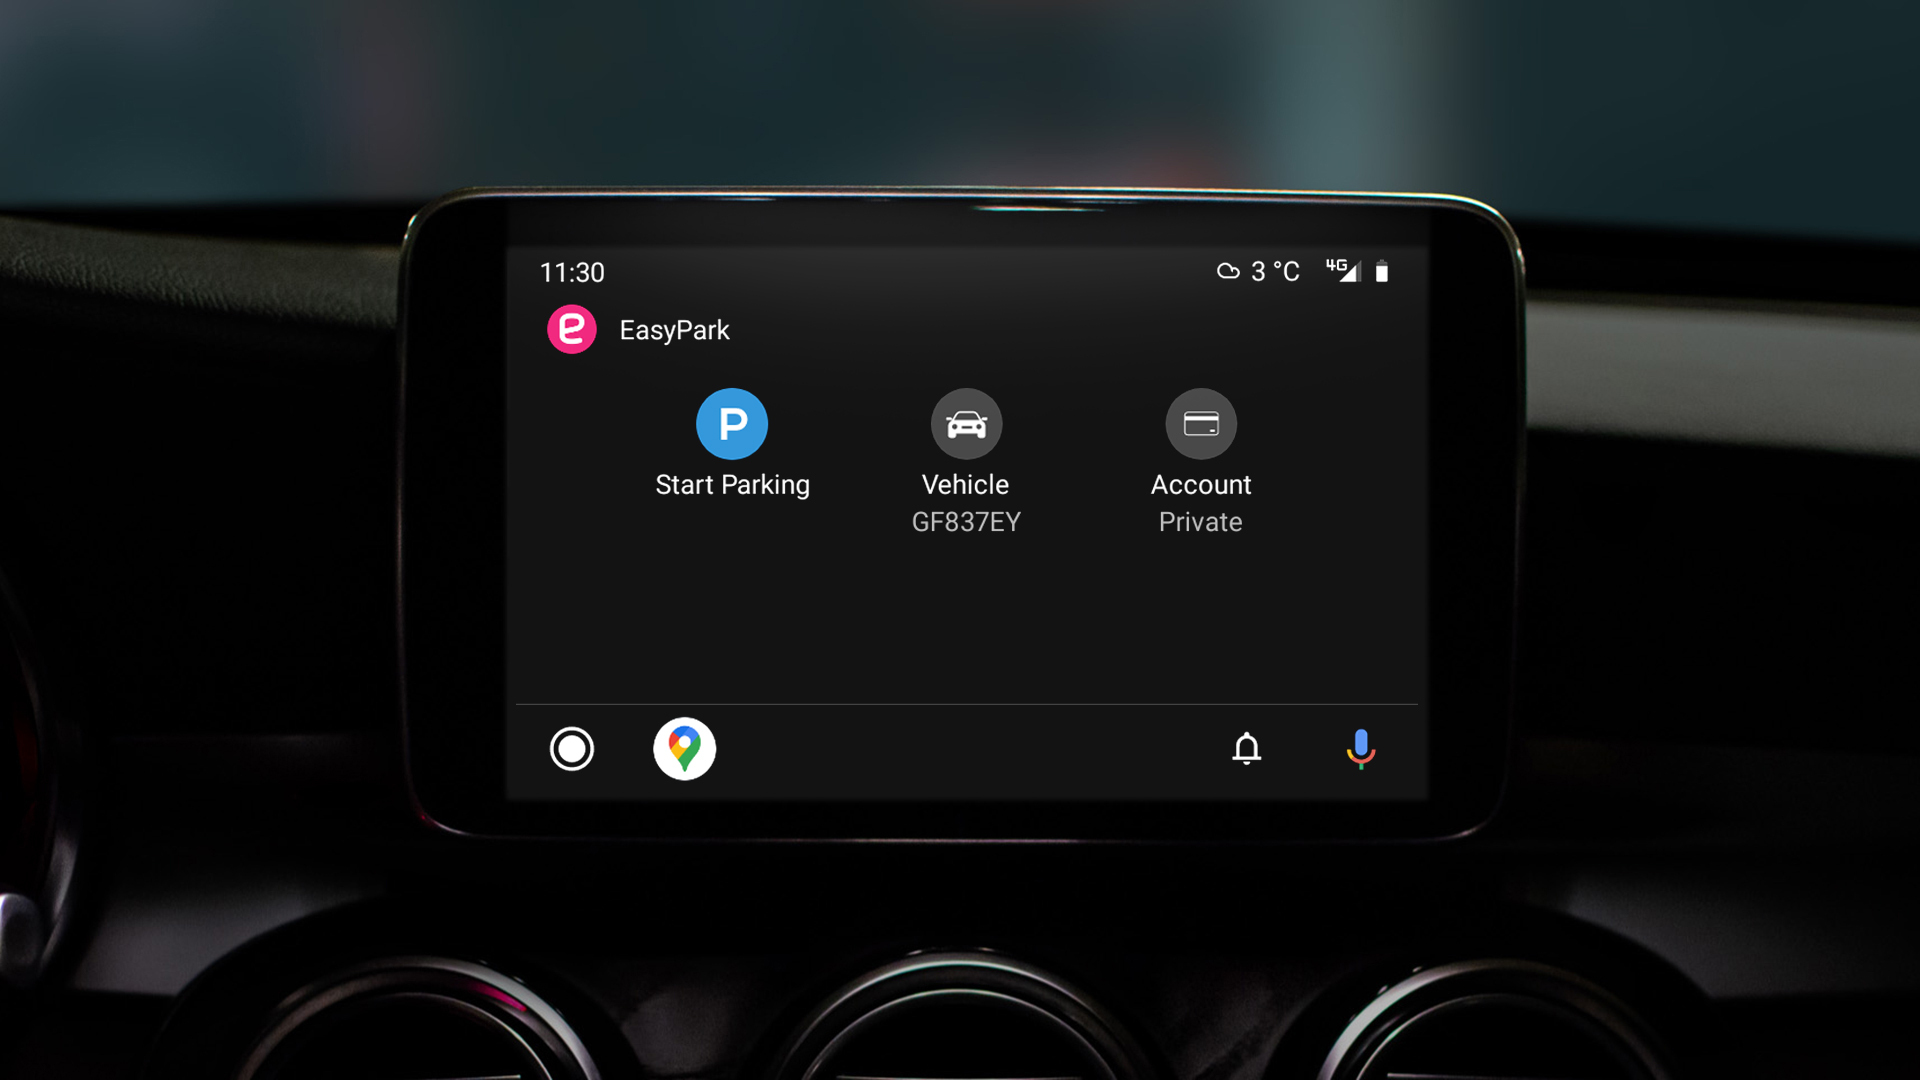 EasyPark now lets users with Android™ phones find and manage their parking and electric car charging directly via Android Auto on their car's infotainment system.